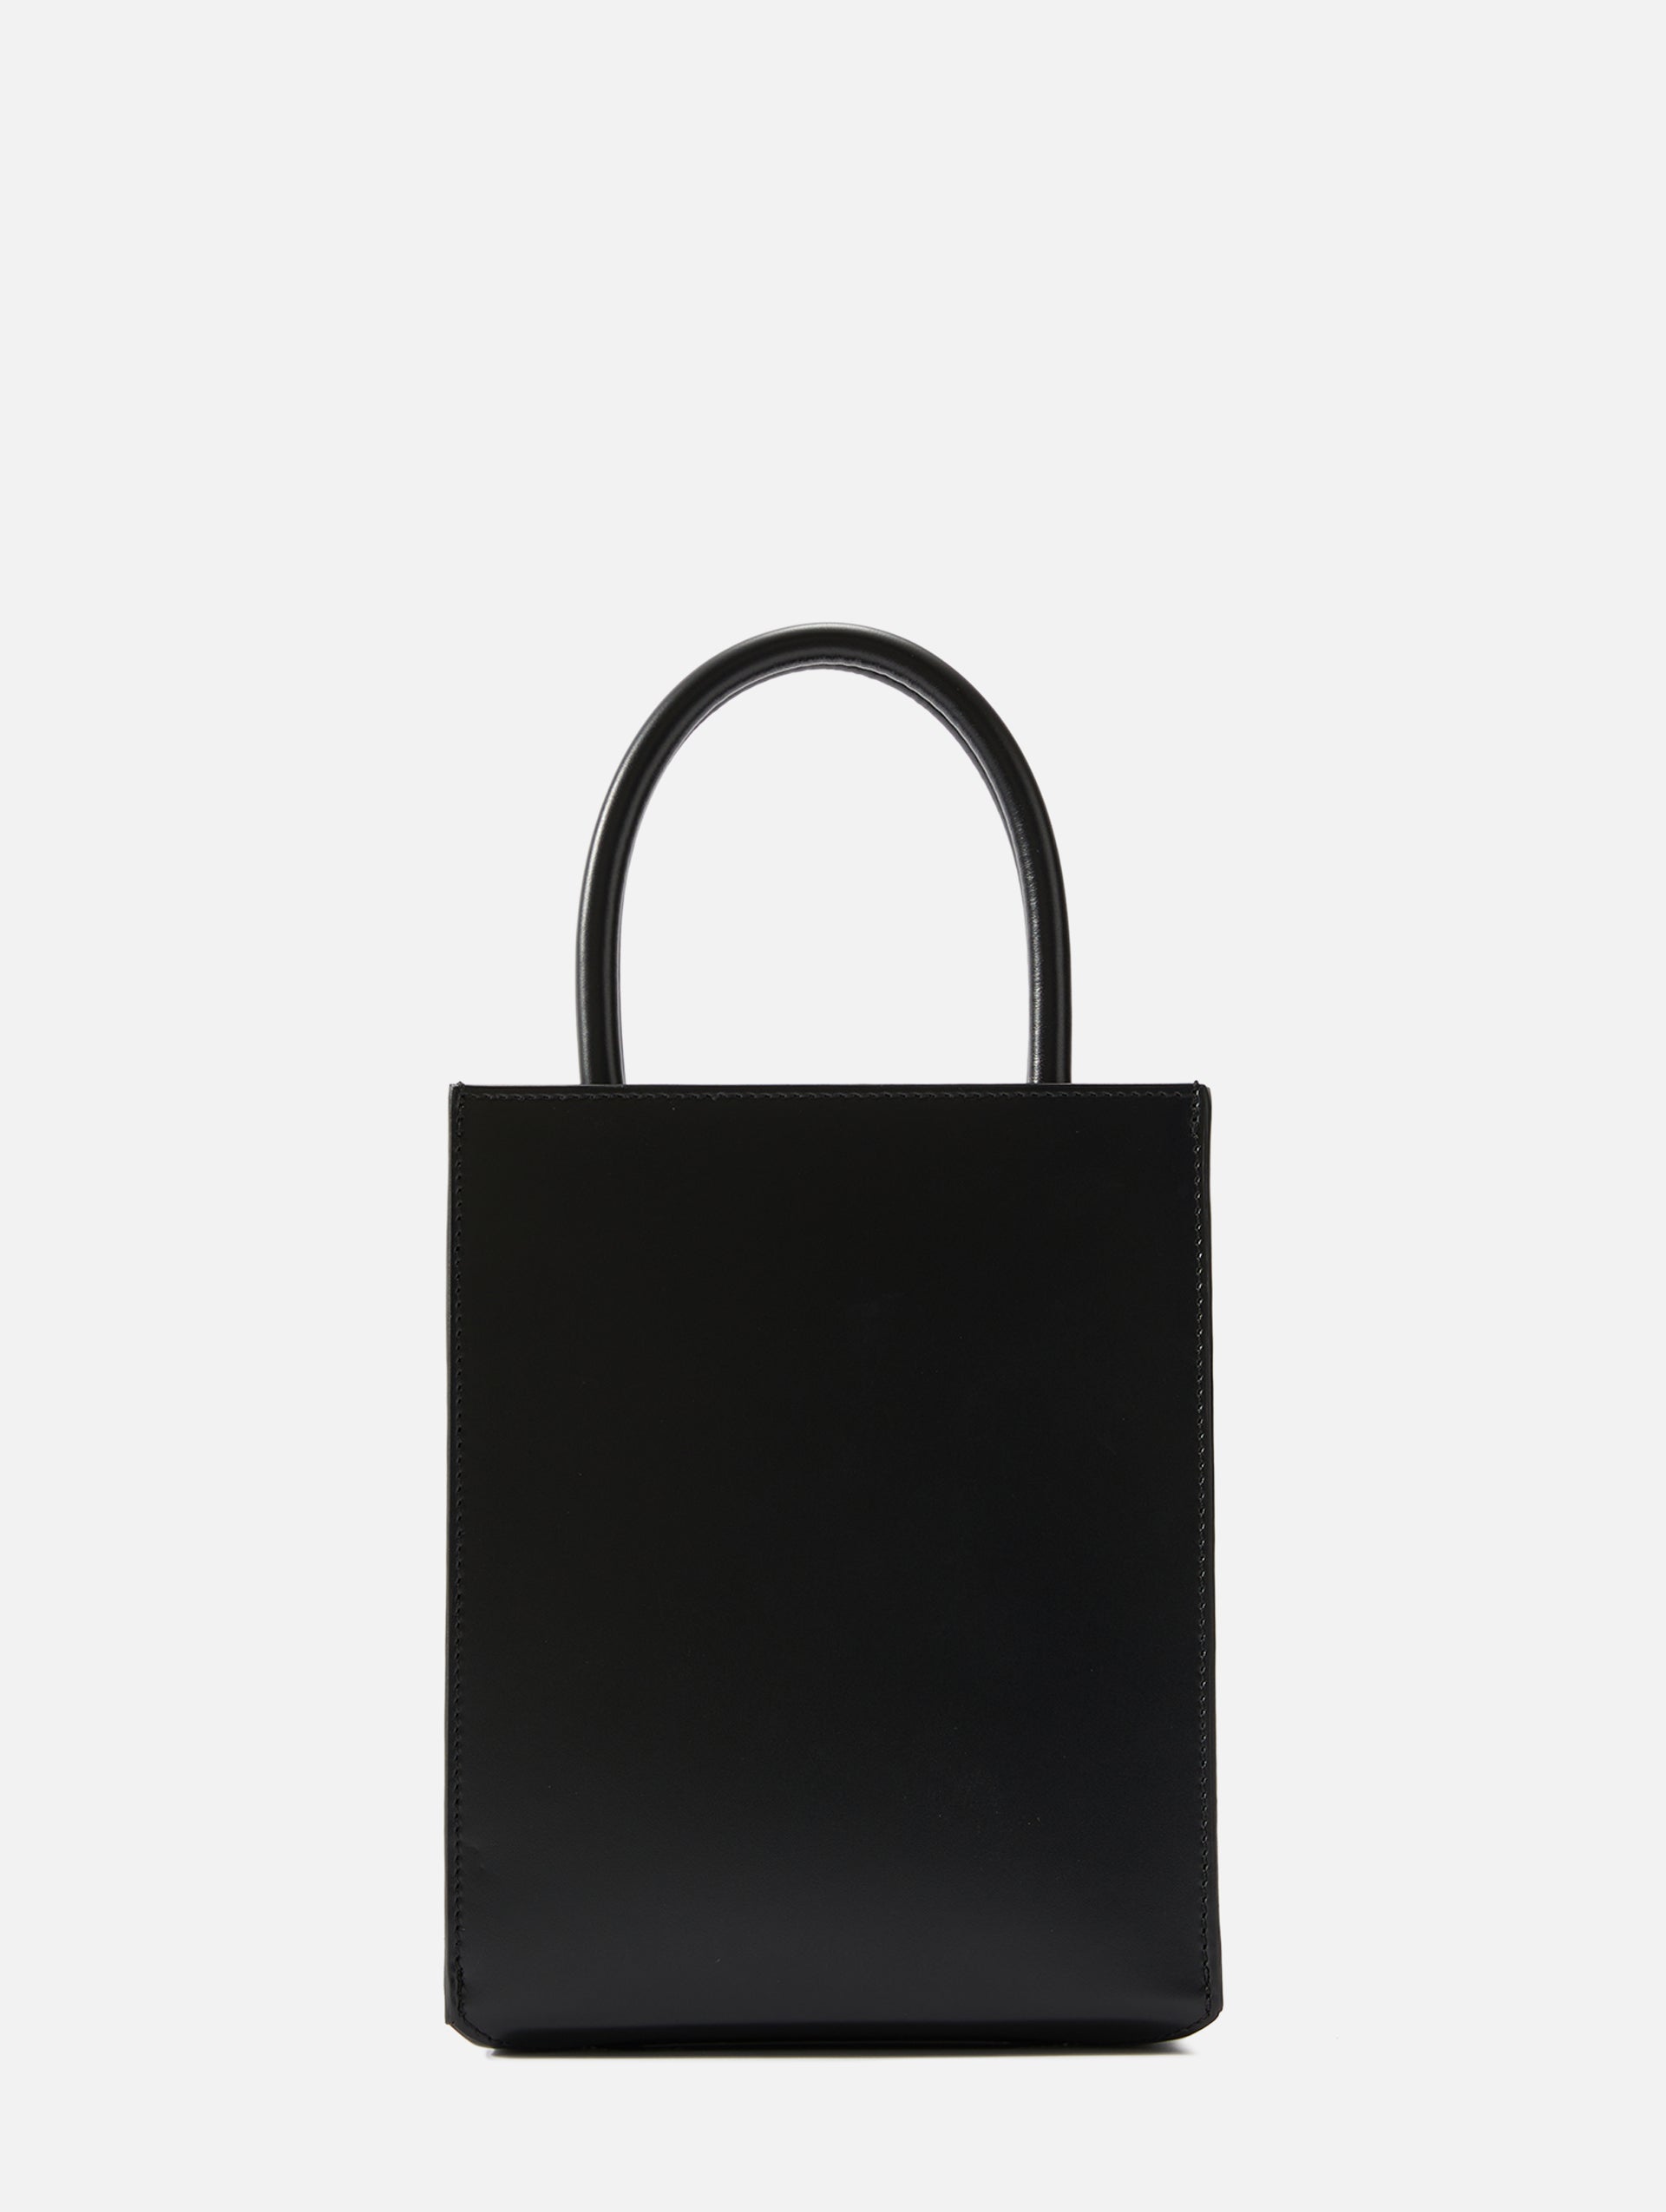 This Is Not Quiet Luxury Tote Bag - White Tote Bag